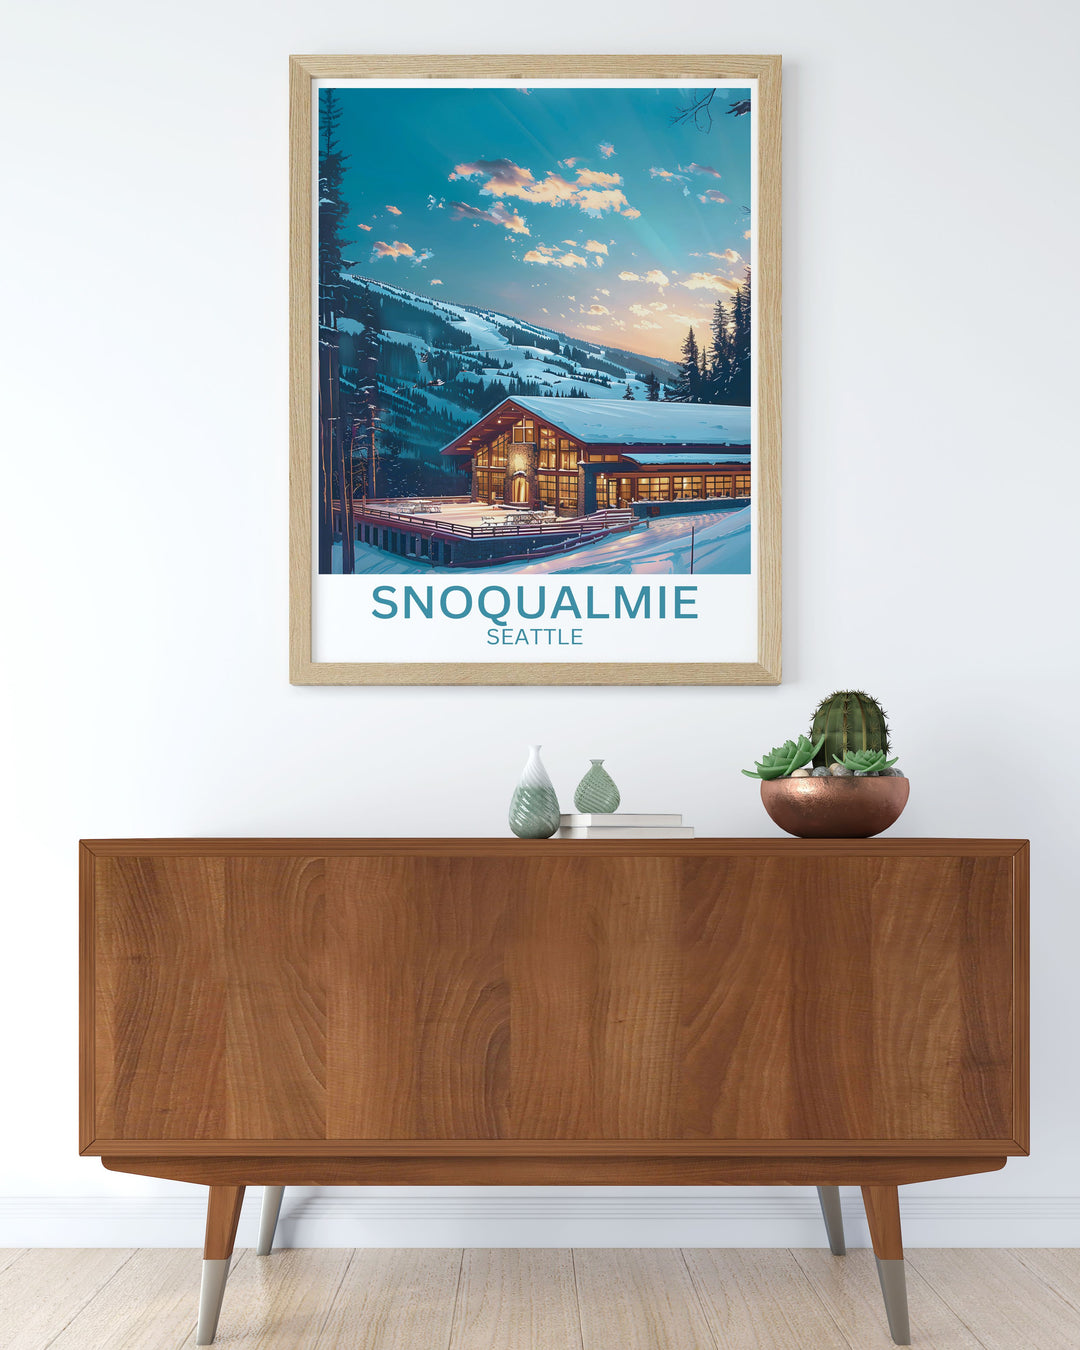 Celebrate the stunning scenery of The Summit at Snoqualmie with this detailed art print, showcasing the serene snow covered mountains and vibrant lodge atmosphere.